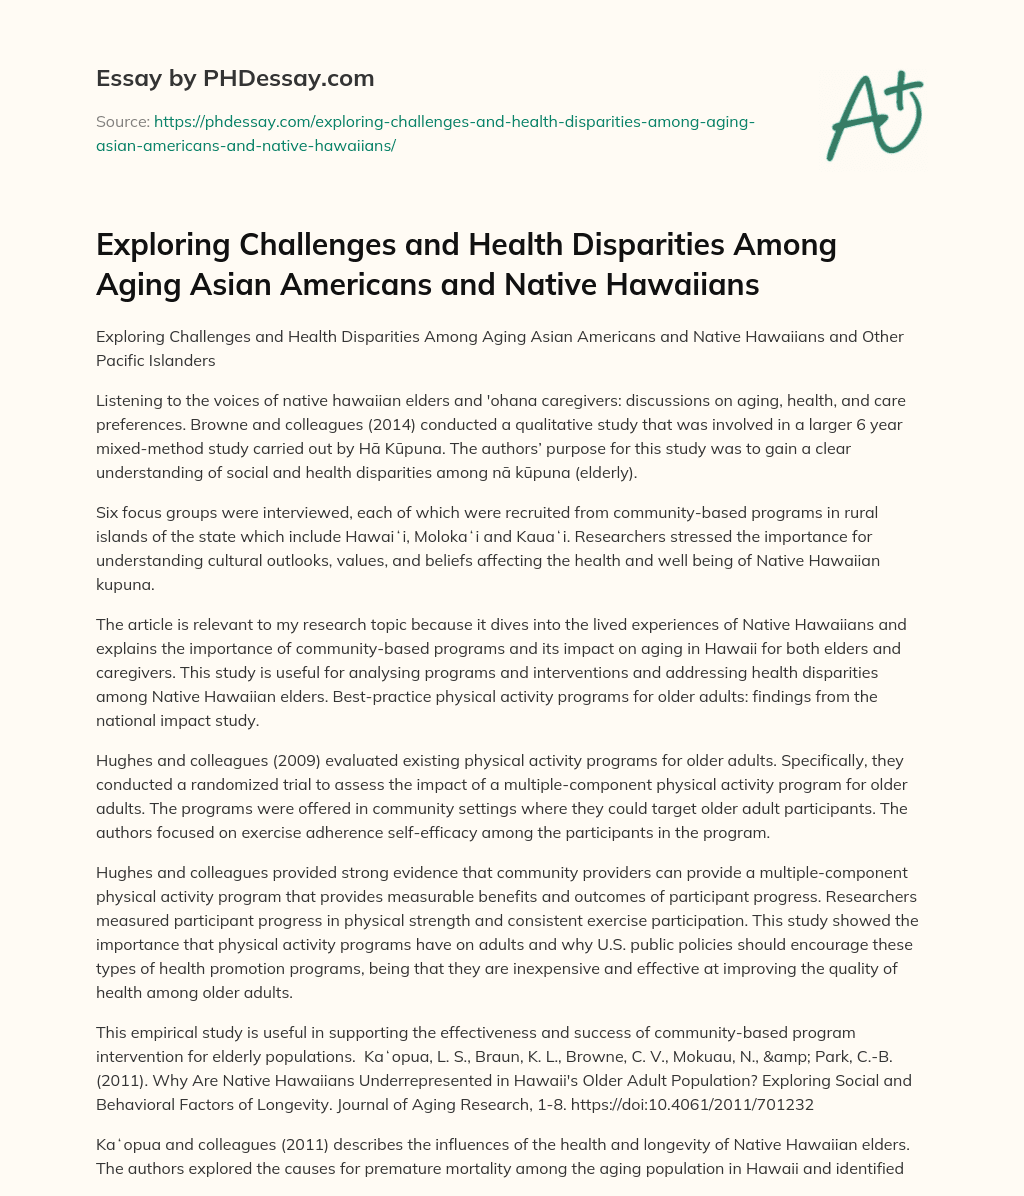 Exploring Challenges and Health Disparities Among Aging Asian Americans and Native Hawaiians essay